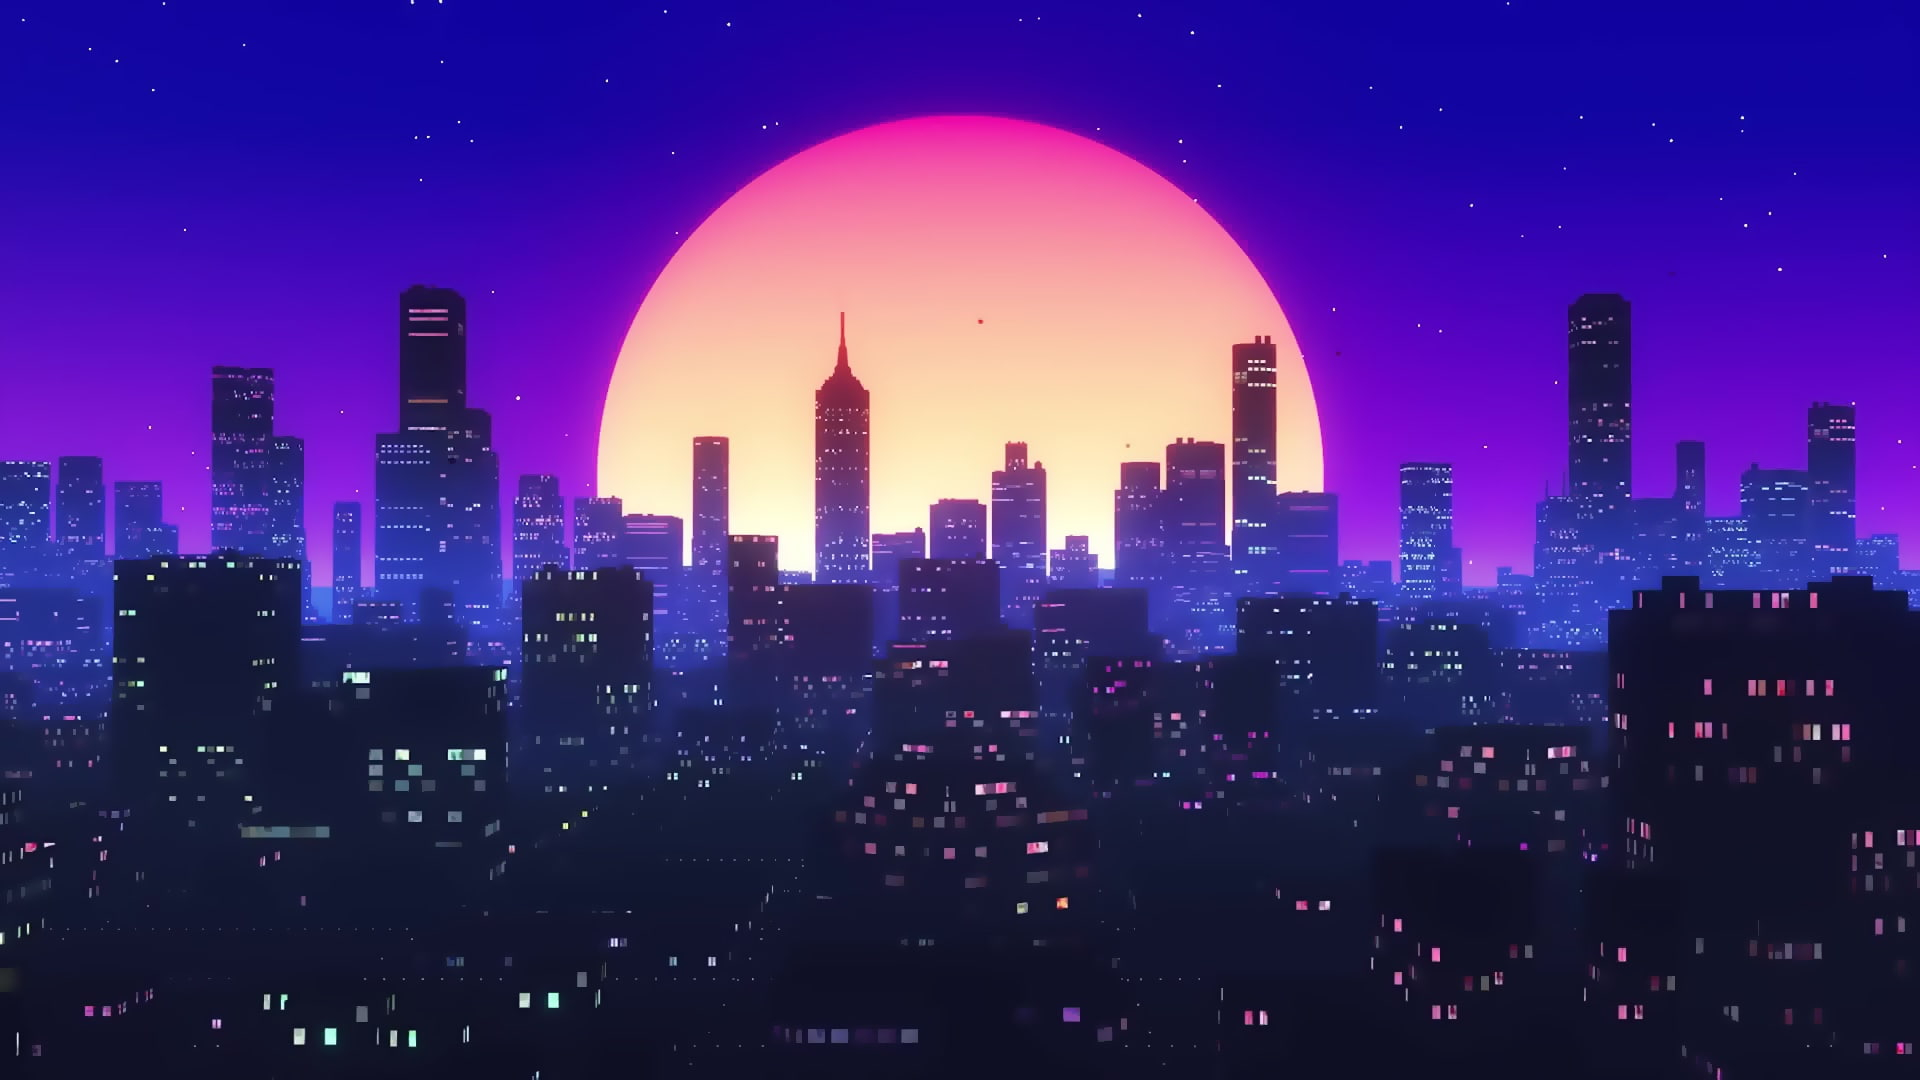 The sun, Night, Music, The city, Background, 80s wallpaper, 80’s, Synth